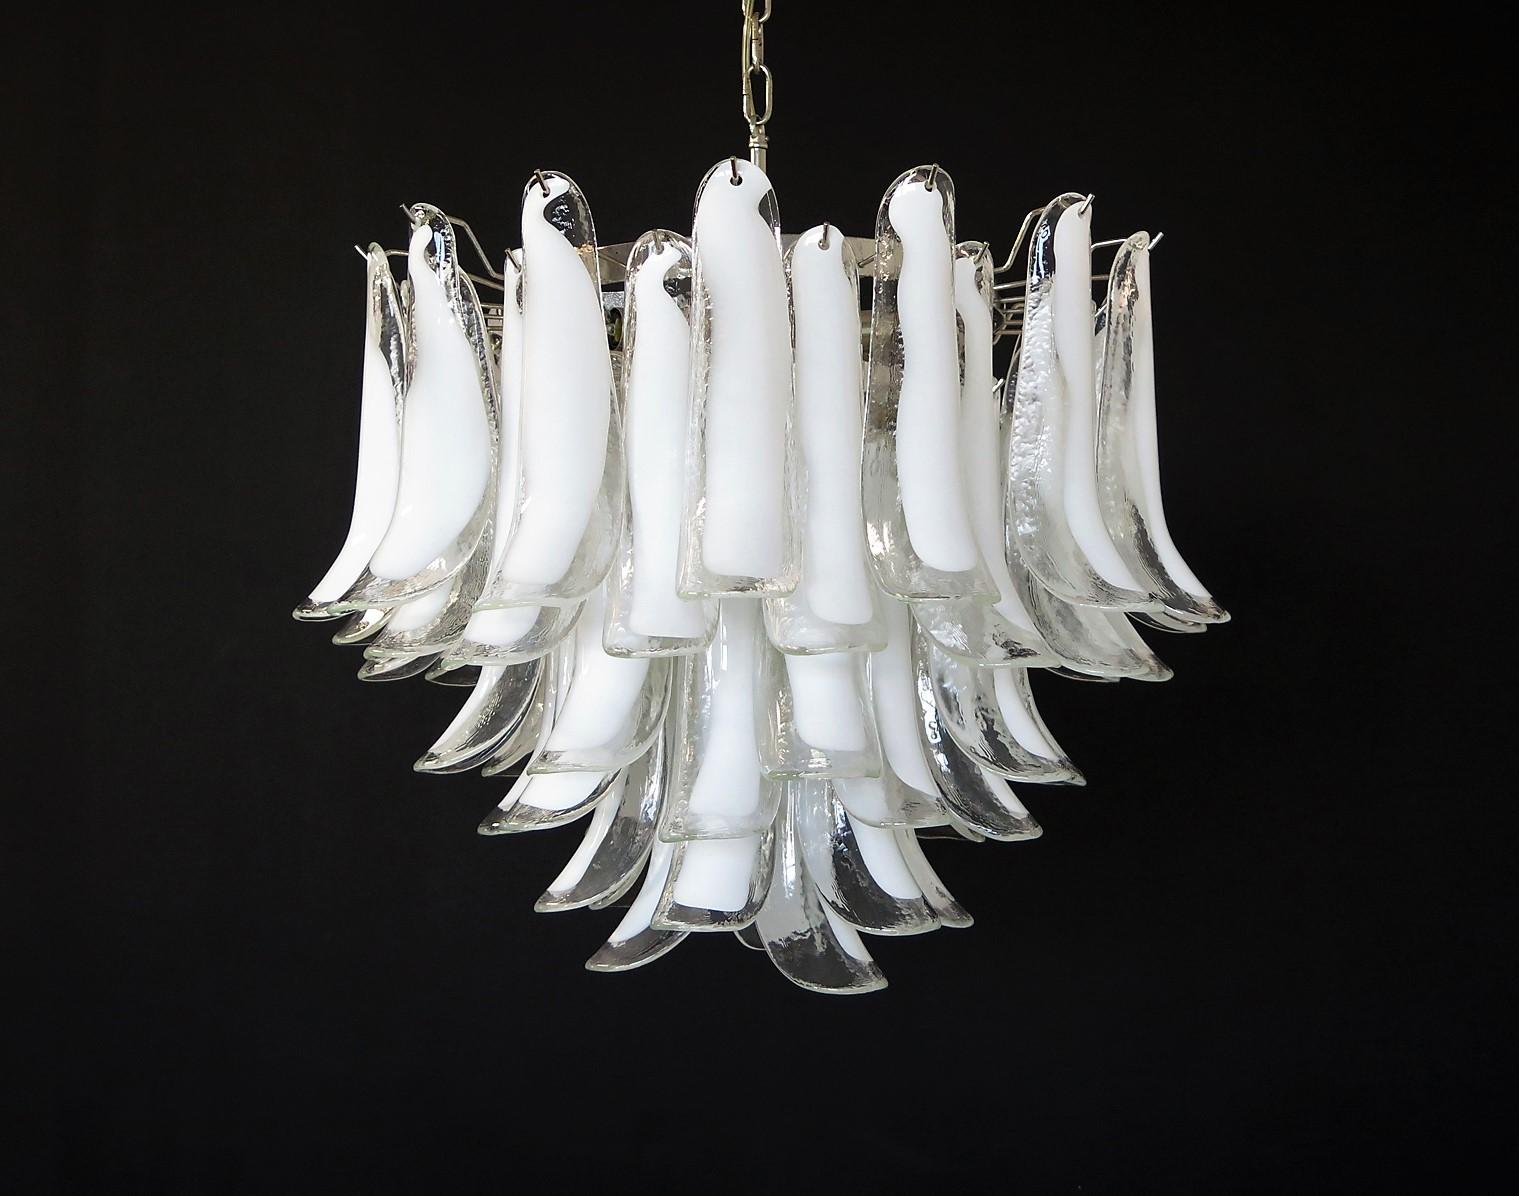 Murano Italian glass chandelier. Fantastic chandelier with transparent and white “lattimo” glasses, nickel-plated metal frame. It has 53 big monumental petals glass. The glasses are very high quality, the photos do not do the beauty, luster of these